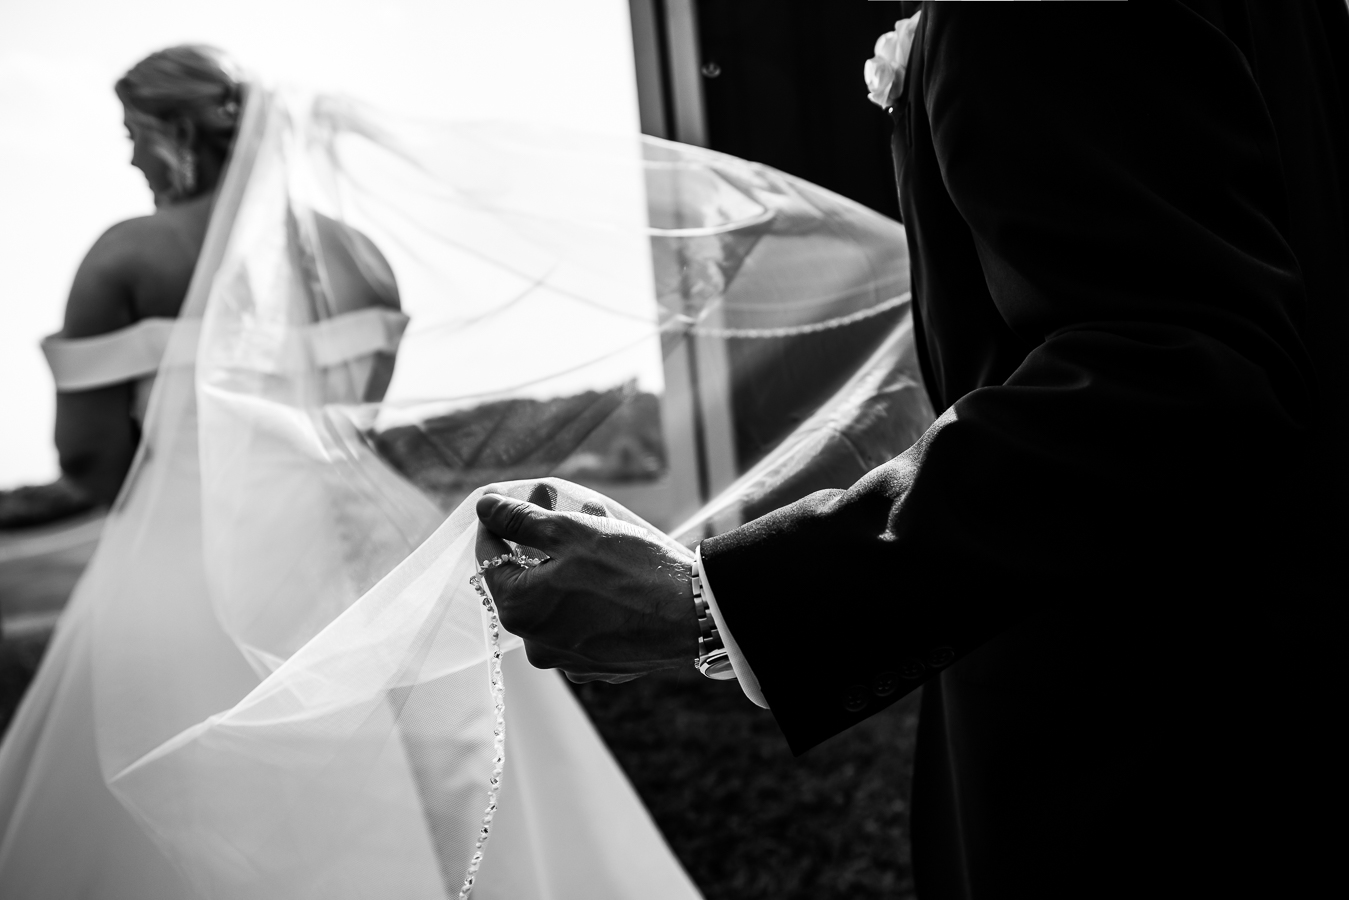 Middleburg Barn Wedding Photographer, lisa rhinehart, captures this black and white image of the groom holding the brides veil during their portraits at their virginia wedding 